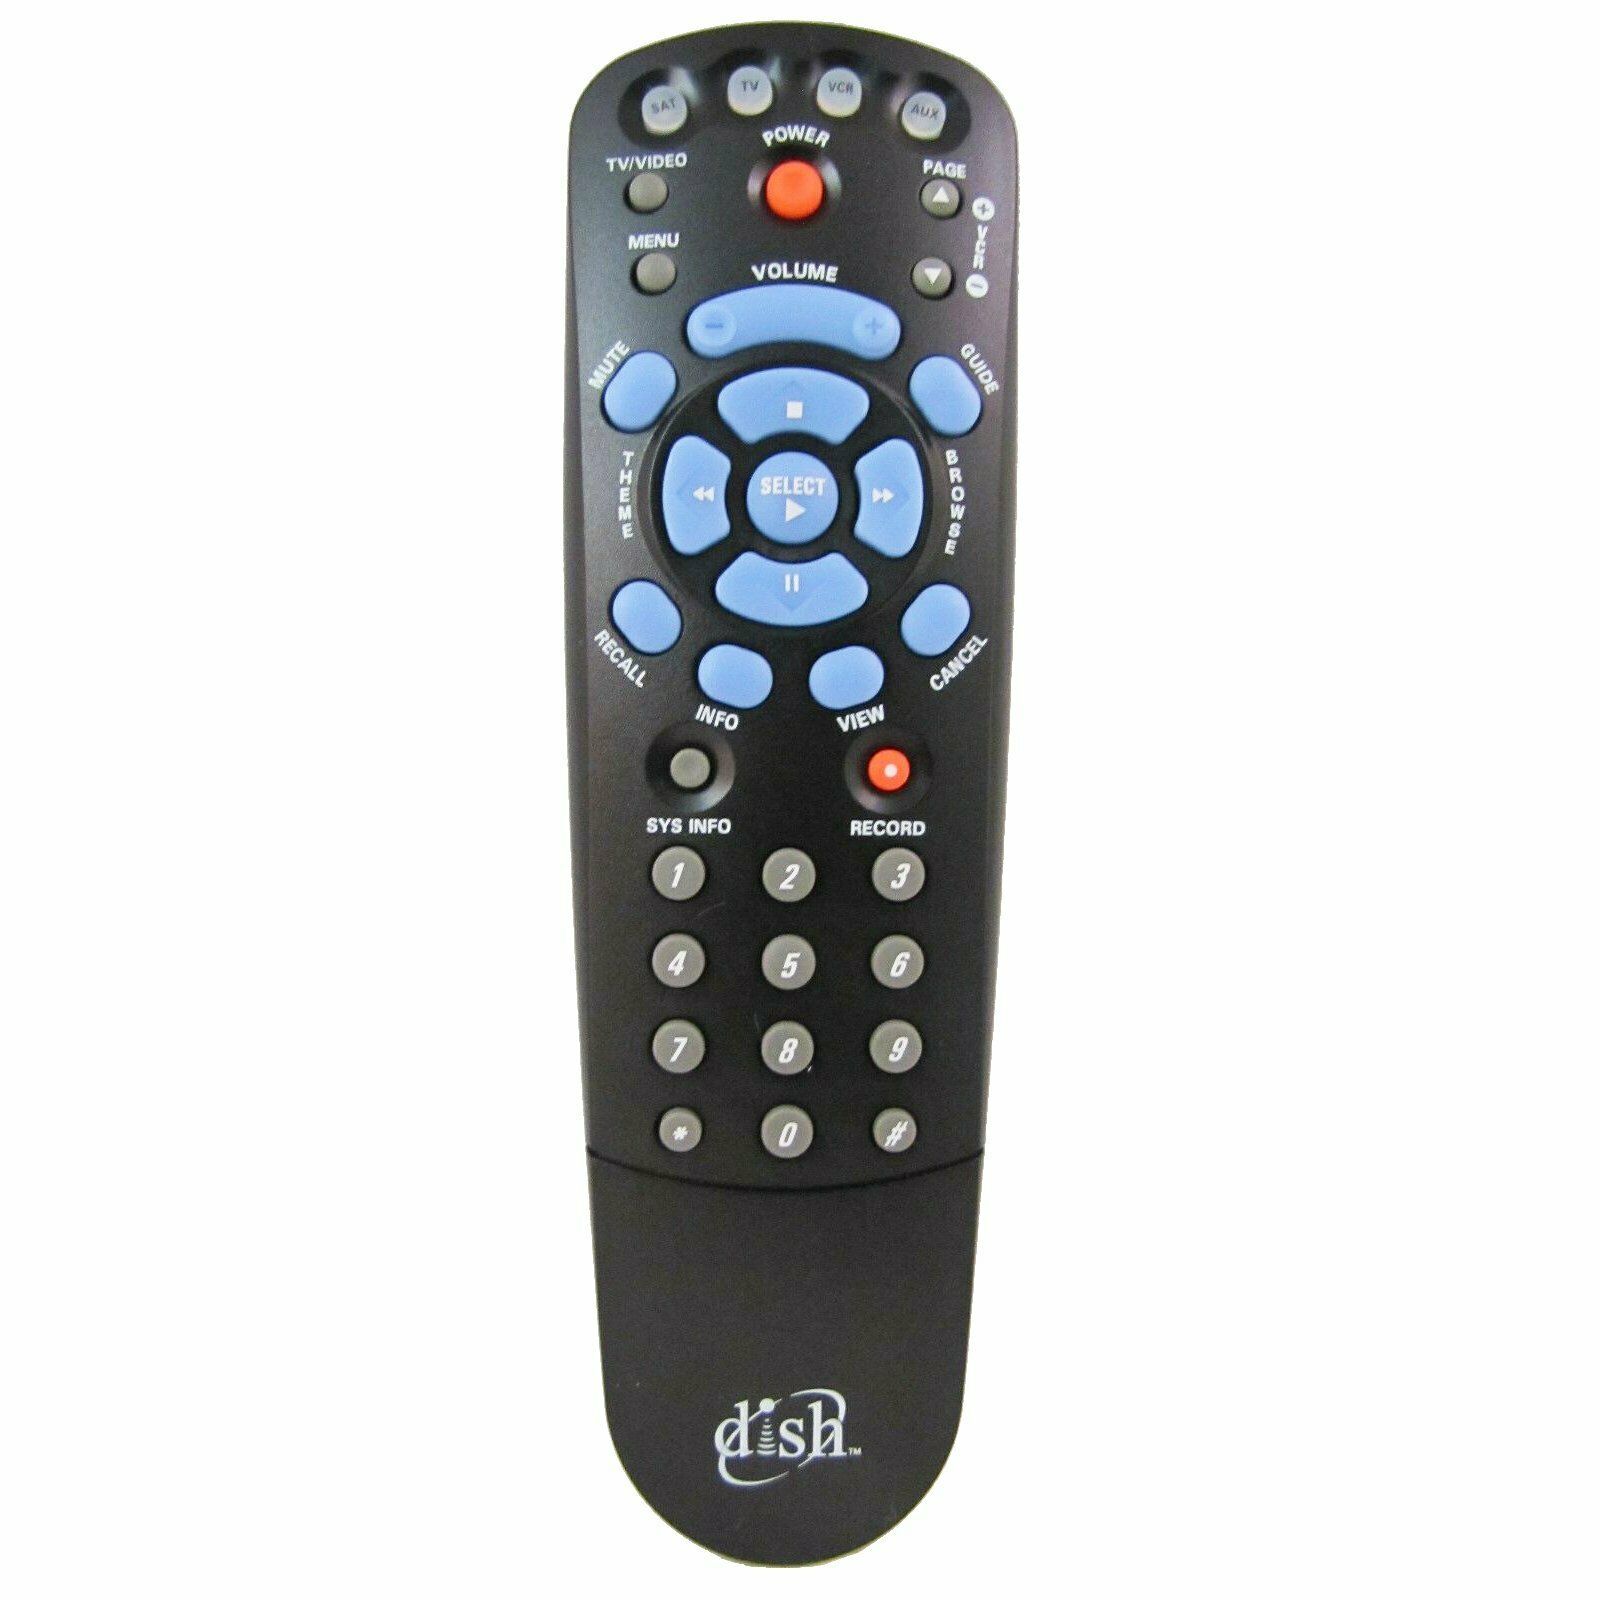 Primary image for Dish Network 123479171-AA Pre-Owned Bell Express Satellite TV Receiver Remote